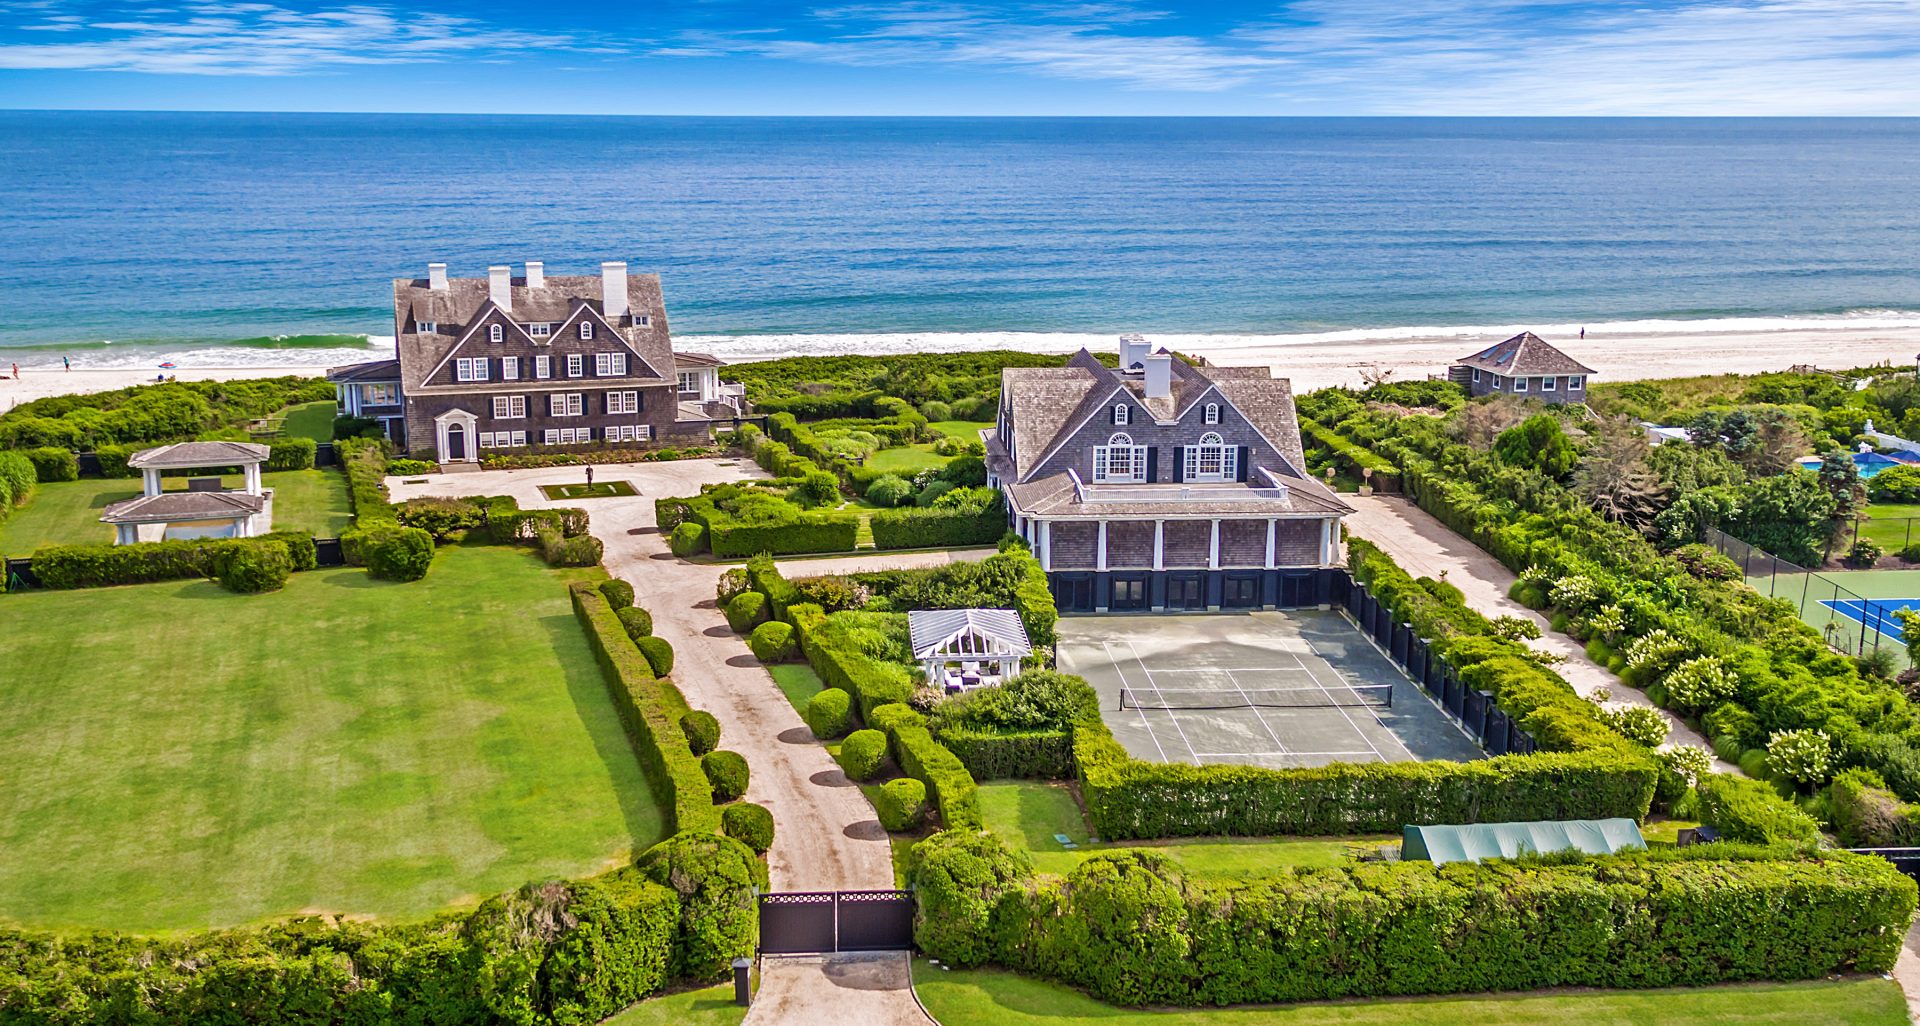 Jam Press JMP418796 The Pinnacle of Luxury: Own the Hamptons' Most Lavish Mansion, Complete with Dual Residences, a Sunken Tennis Court, and Ocean Views